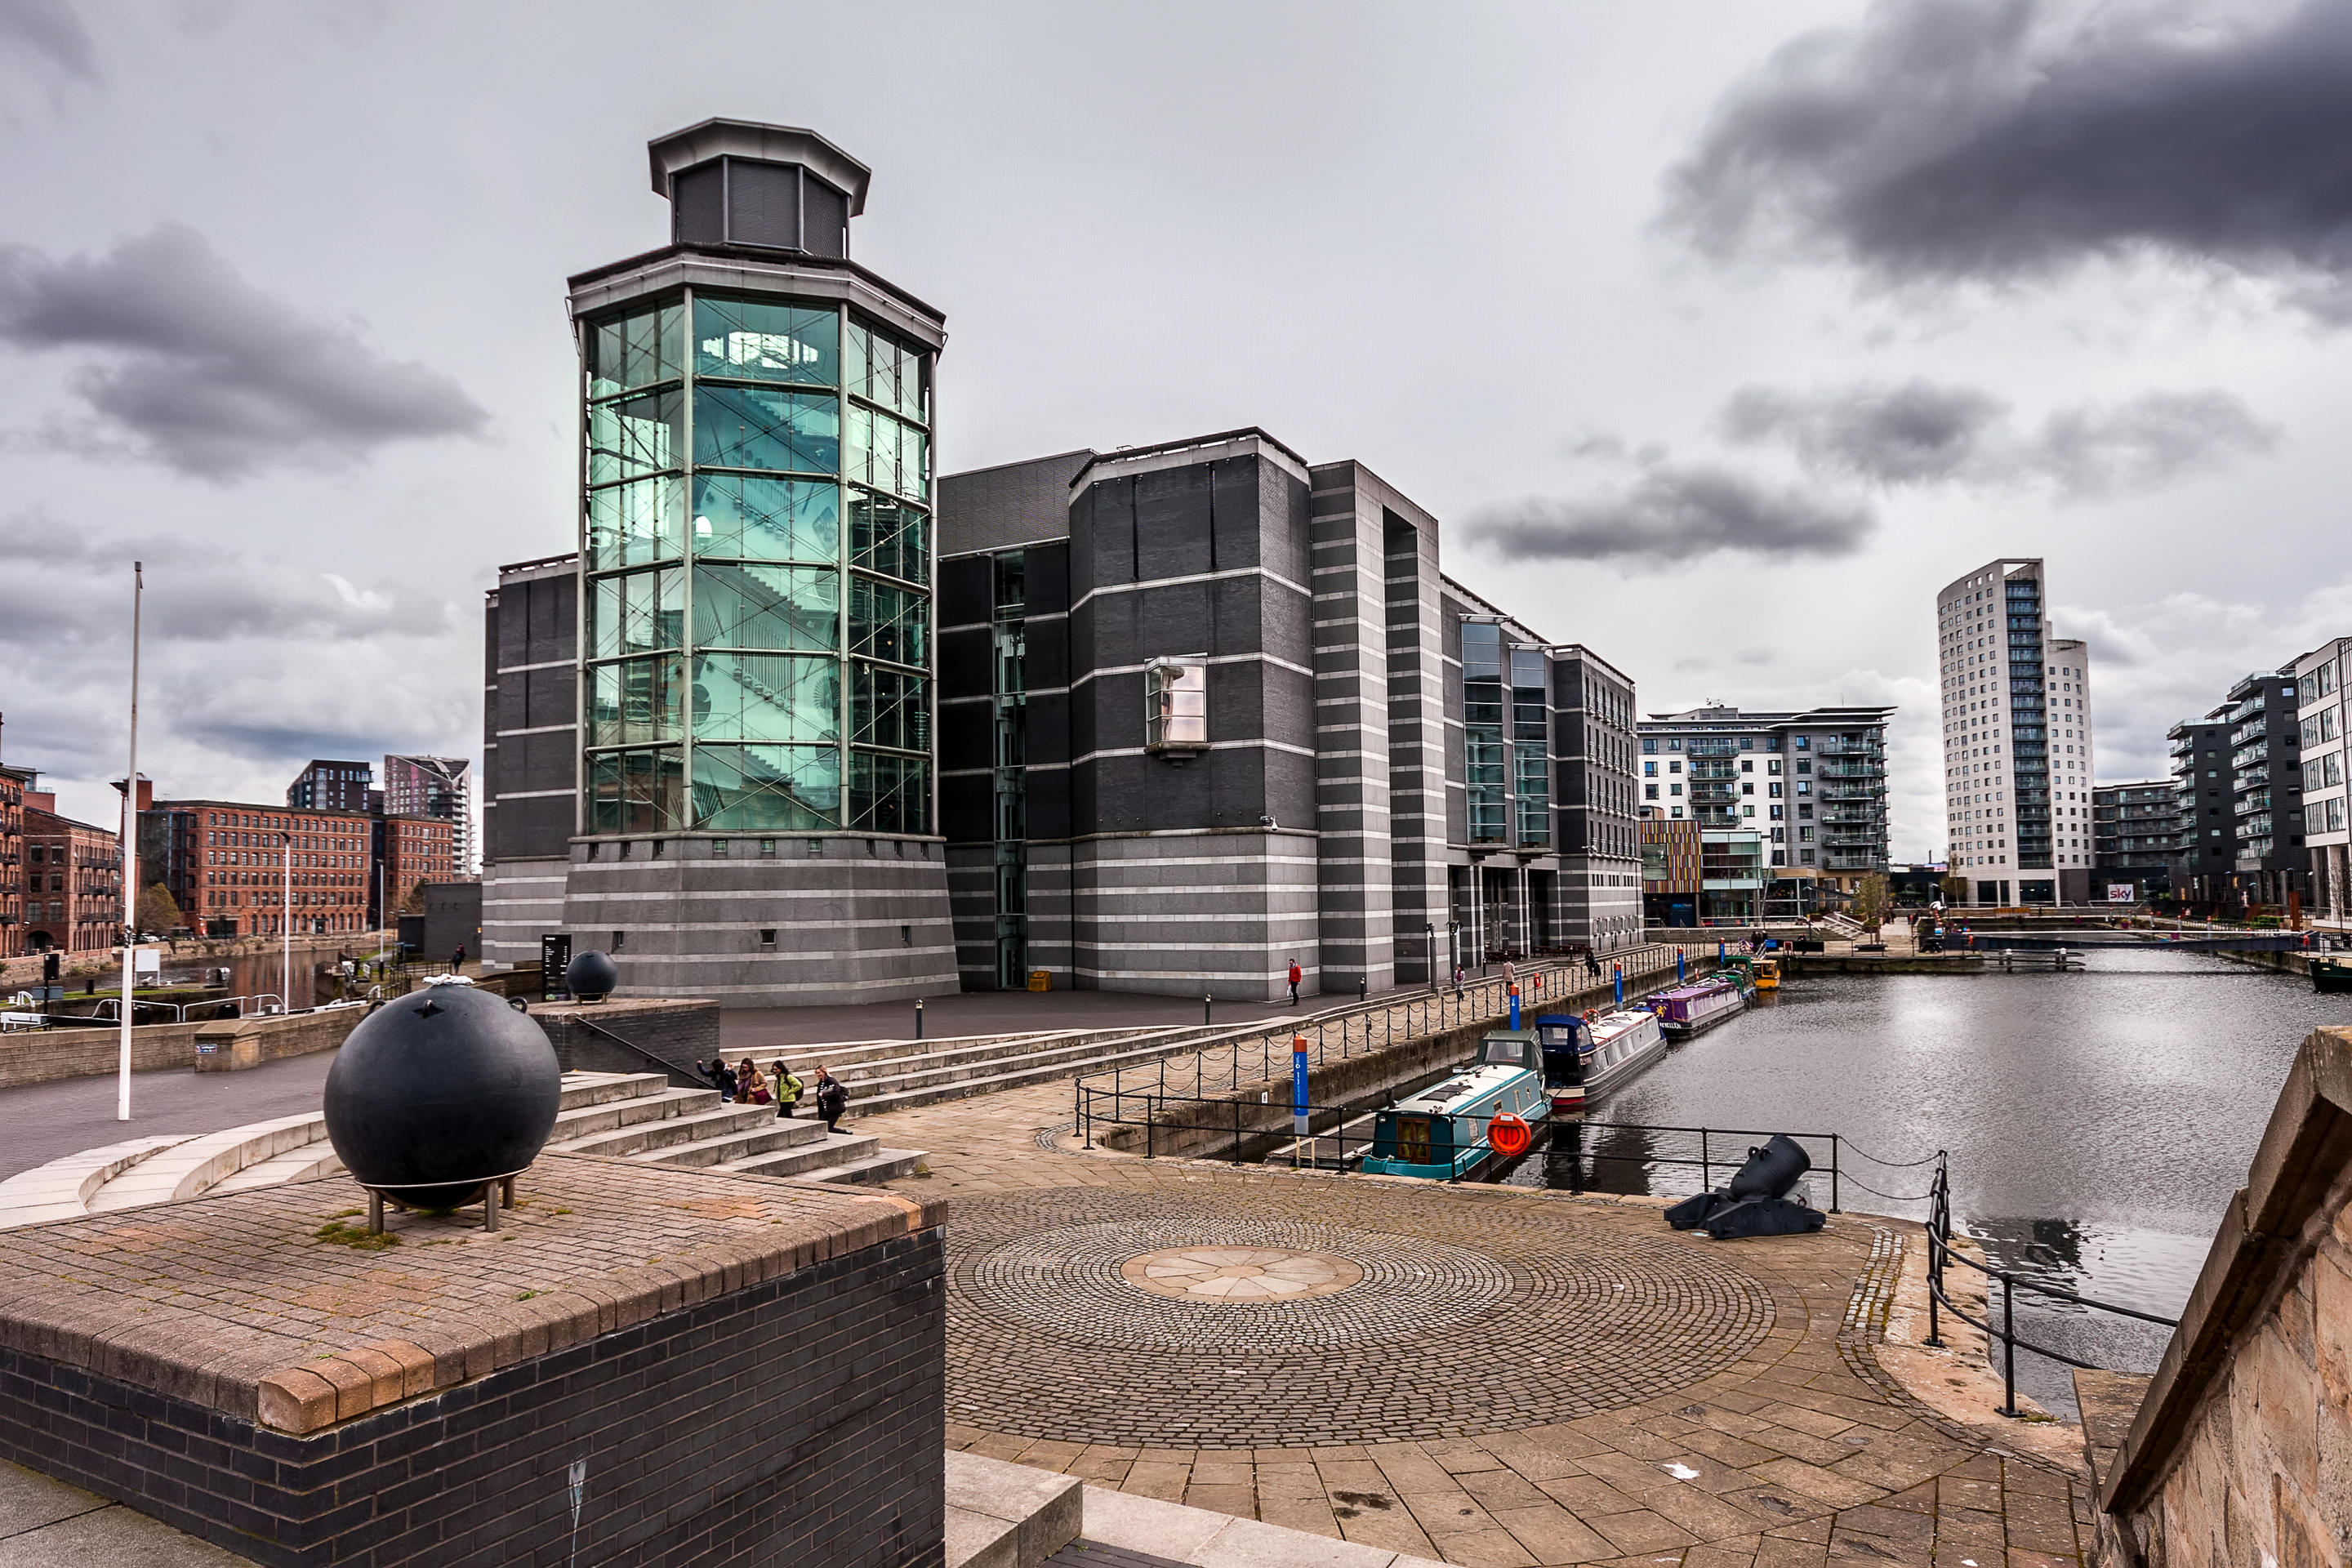 Royal Armouries Overview